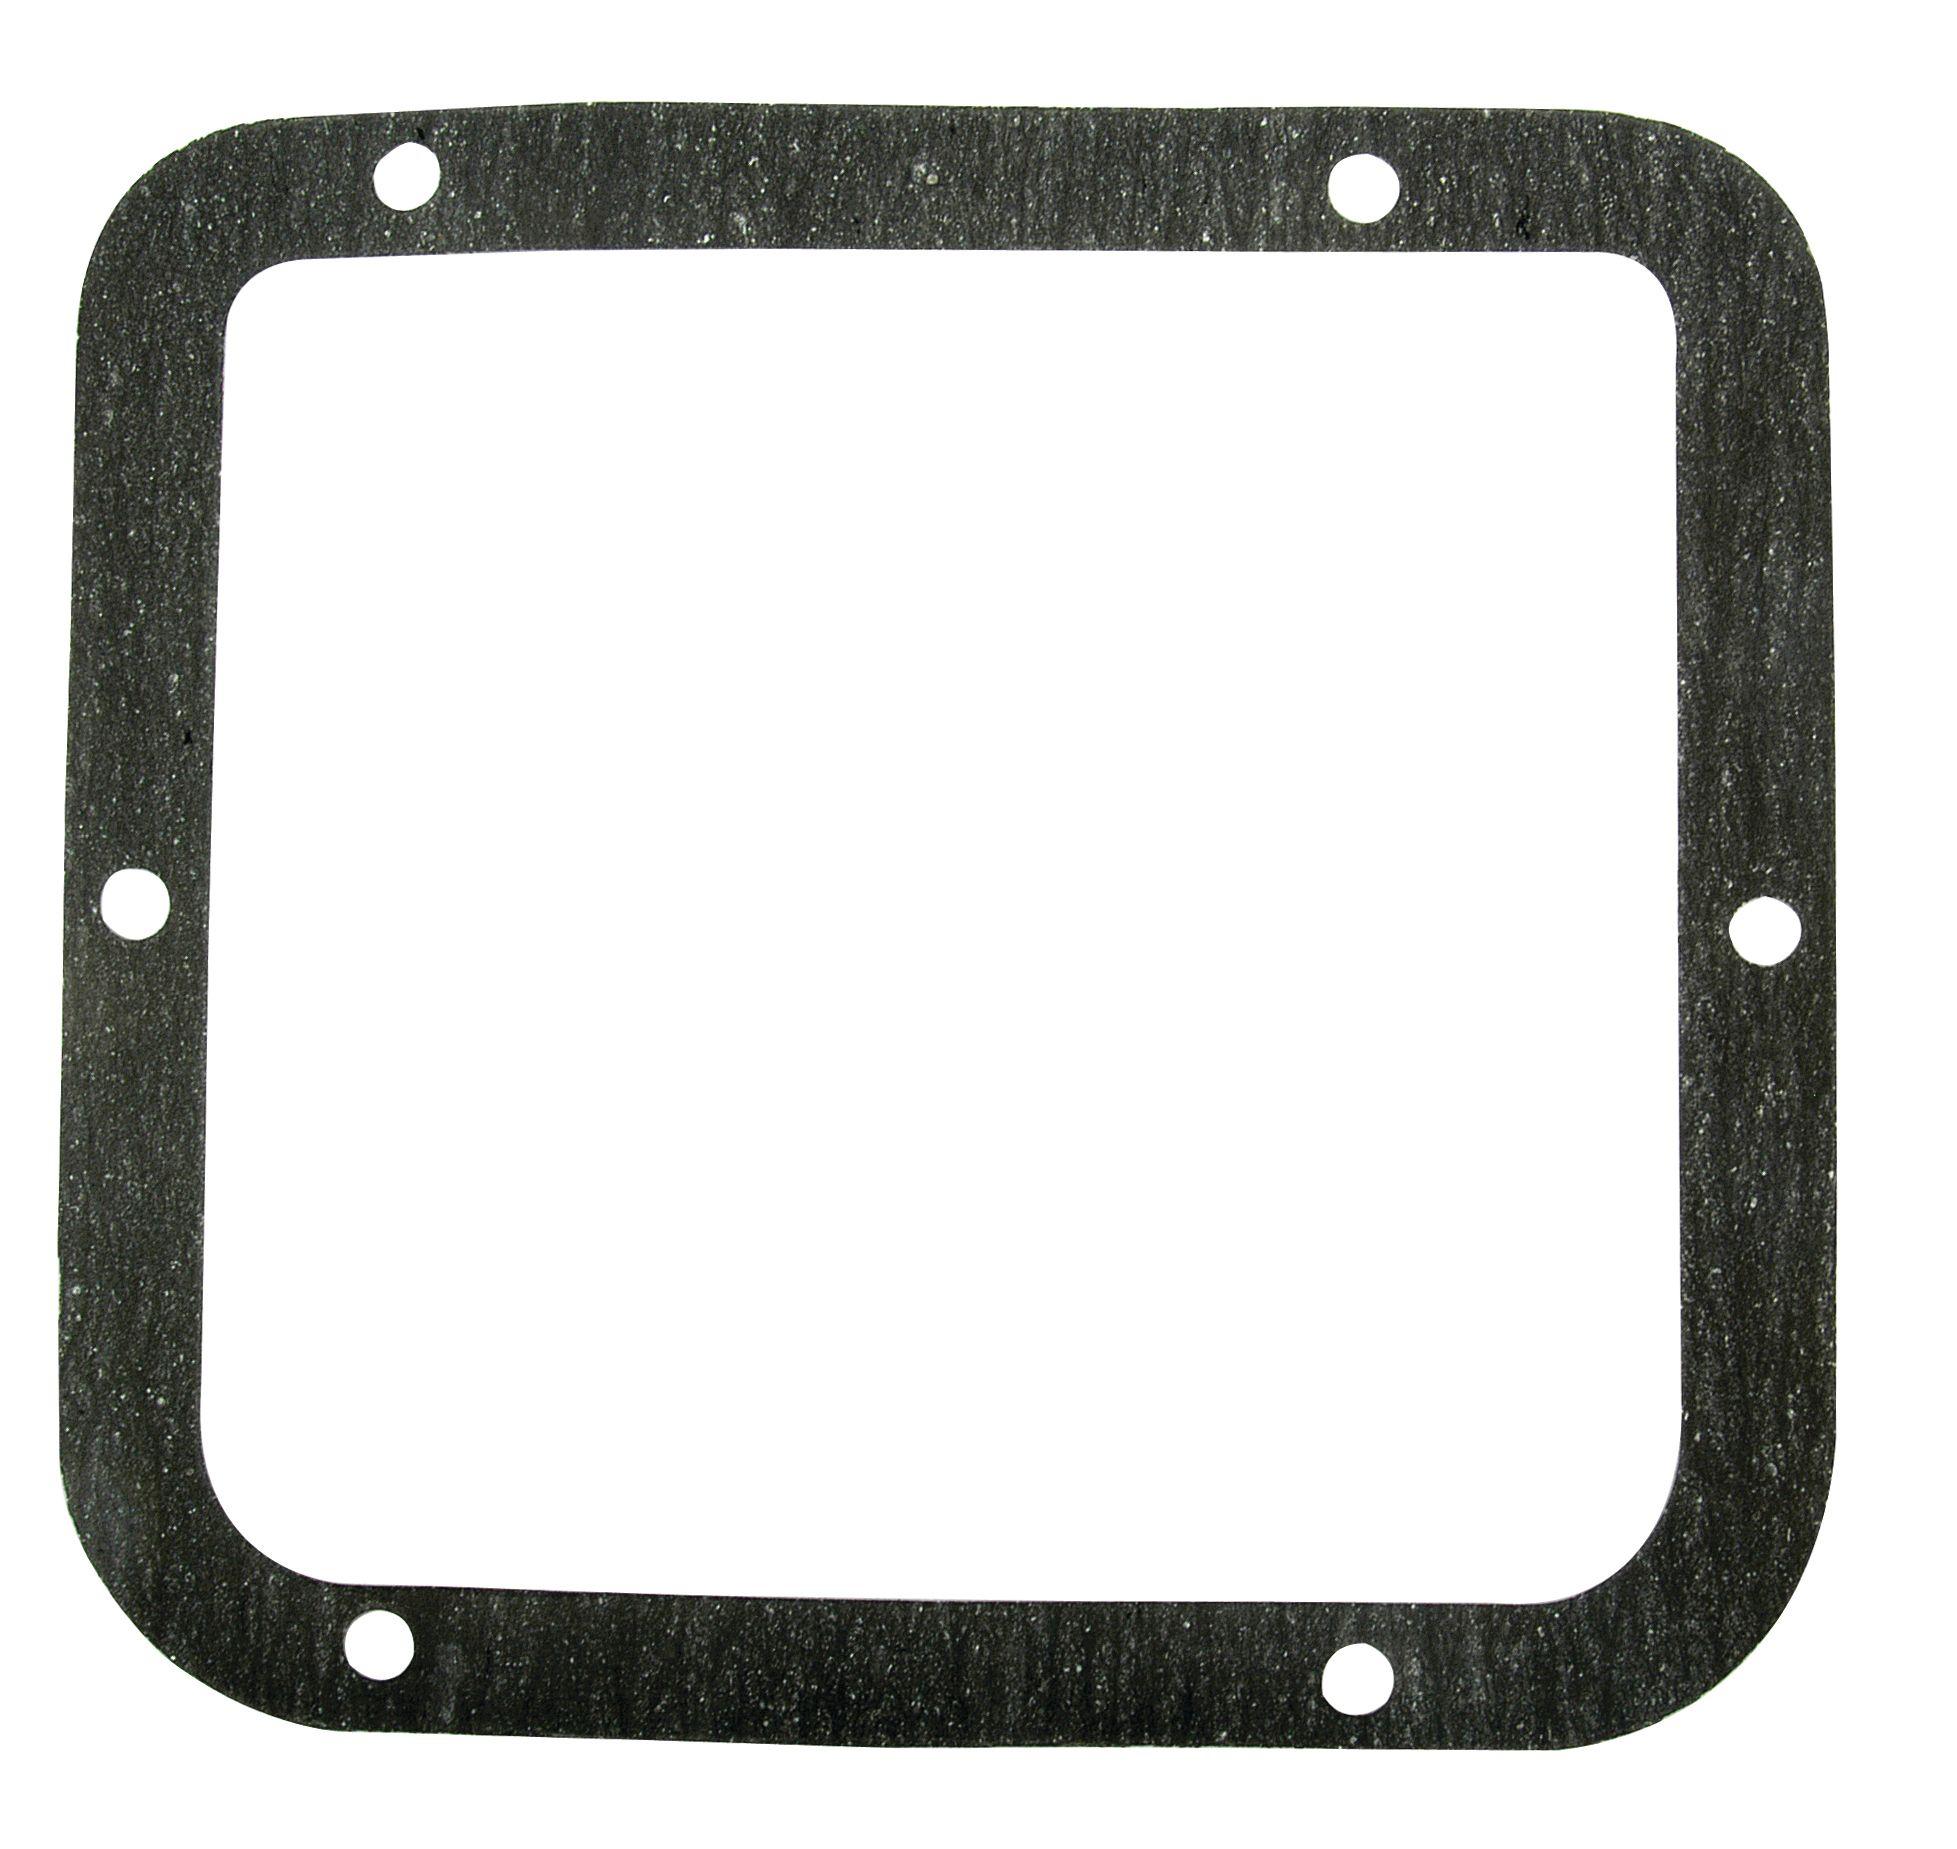 UNIVERSAL TRACTORS GASKET-GEARSHIFT COVER 62546